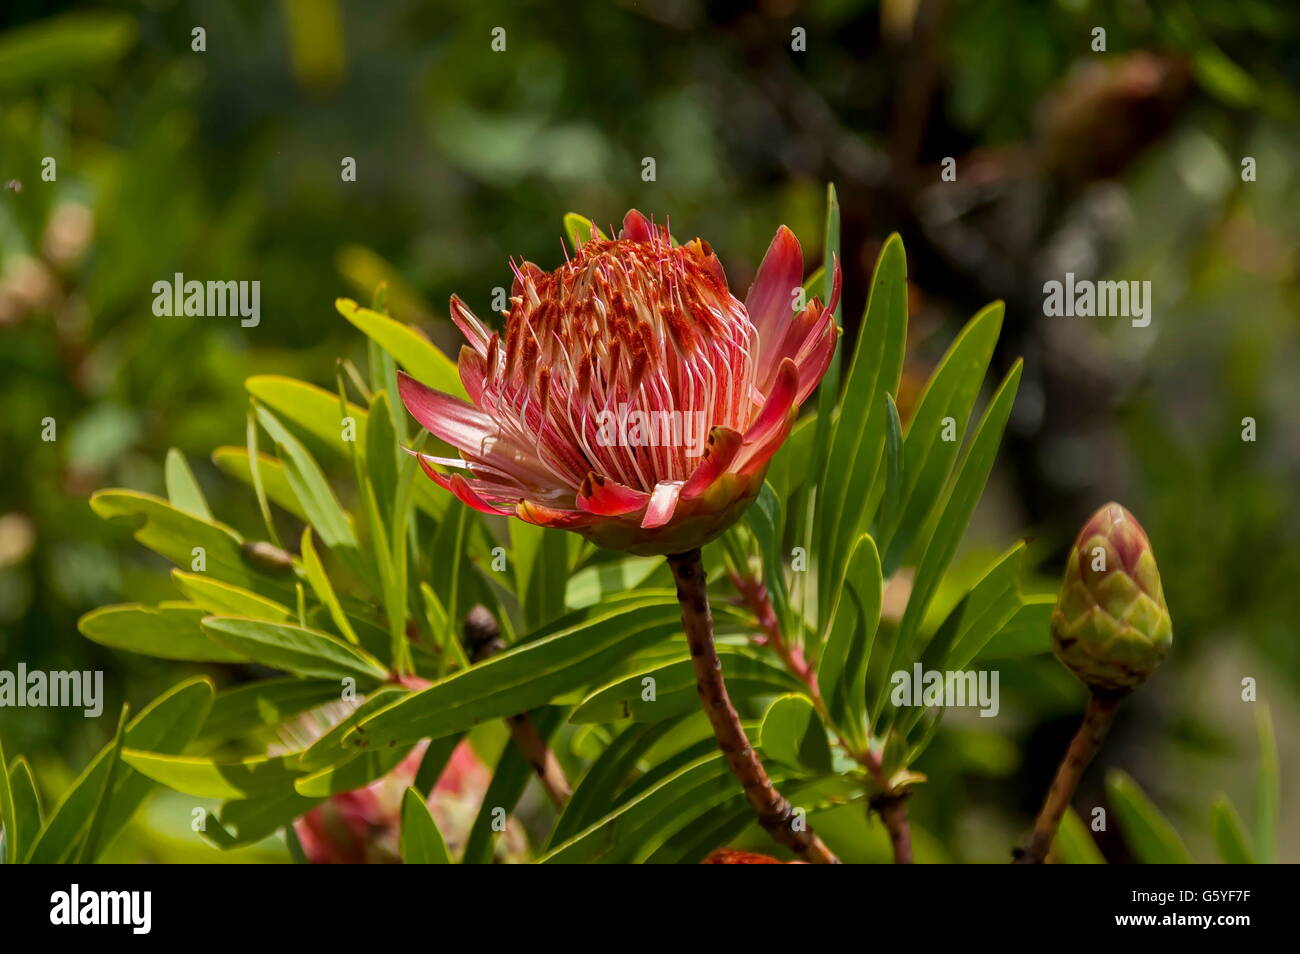 Protea flowers, South African flowering plants, sugarbushes Stock Photo